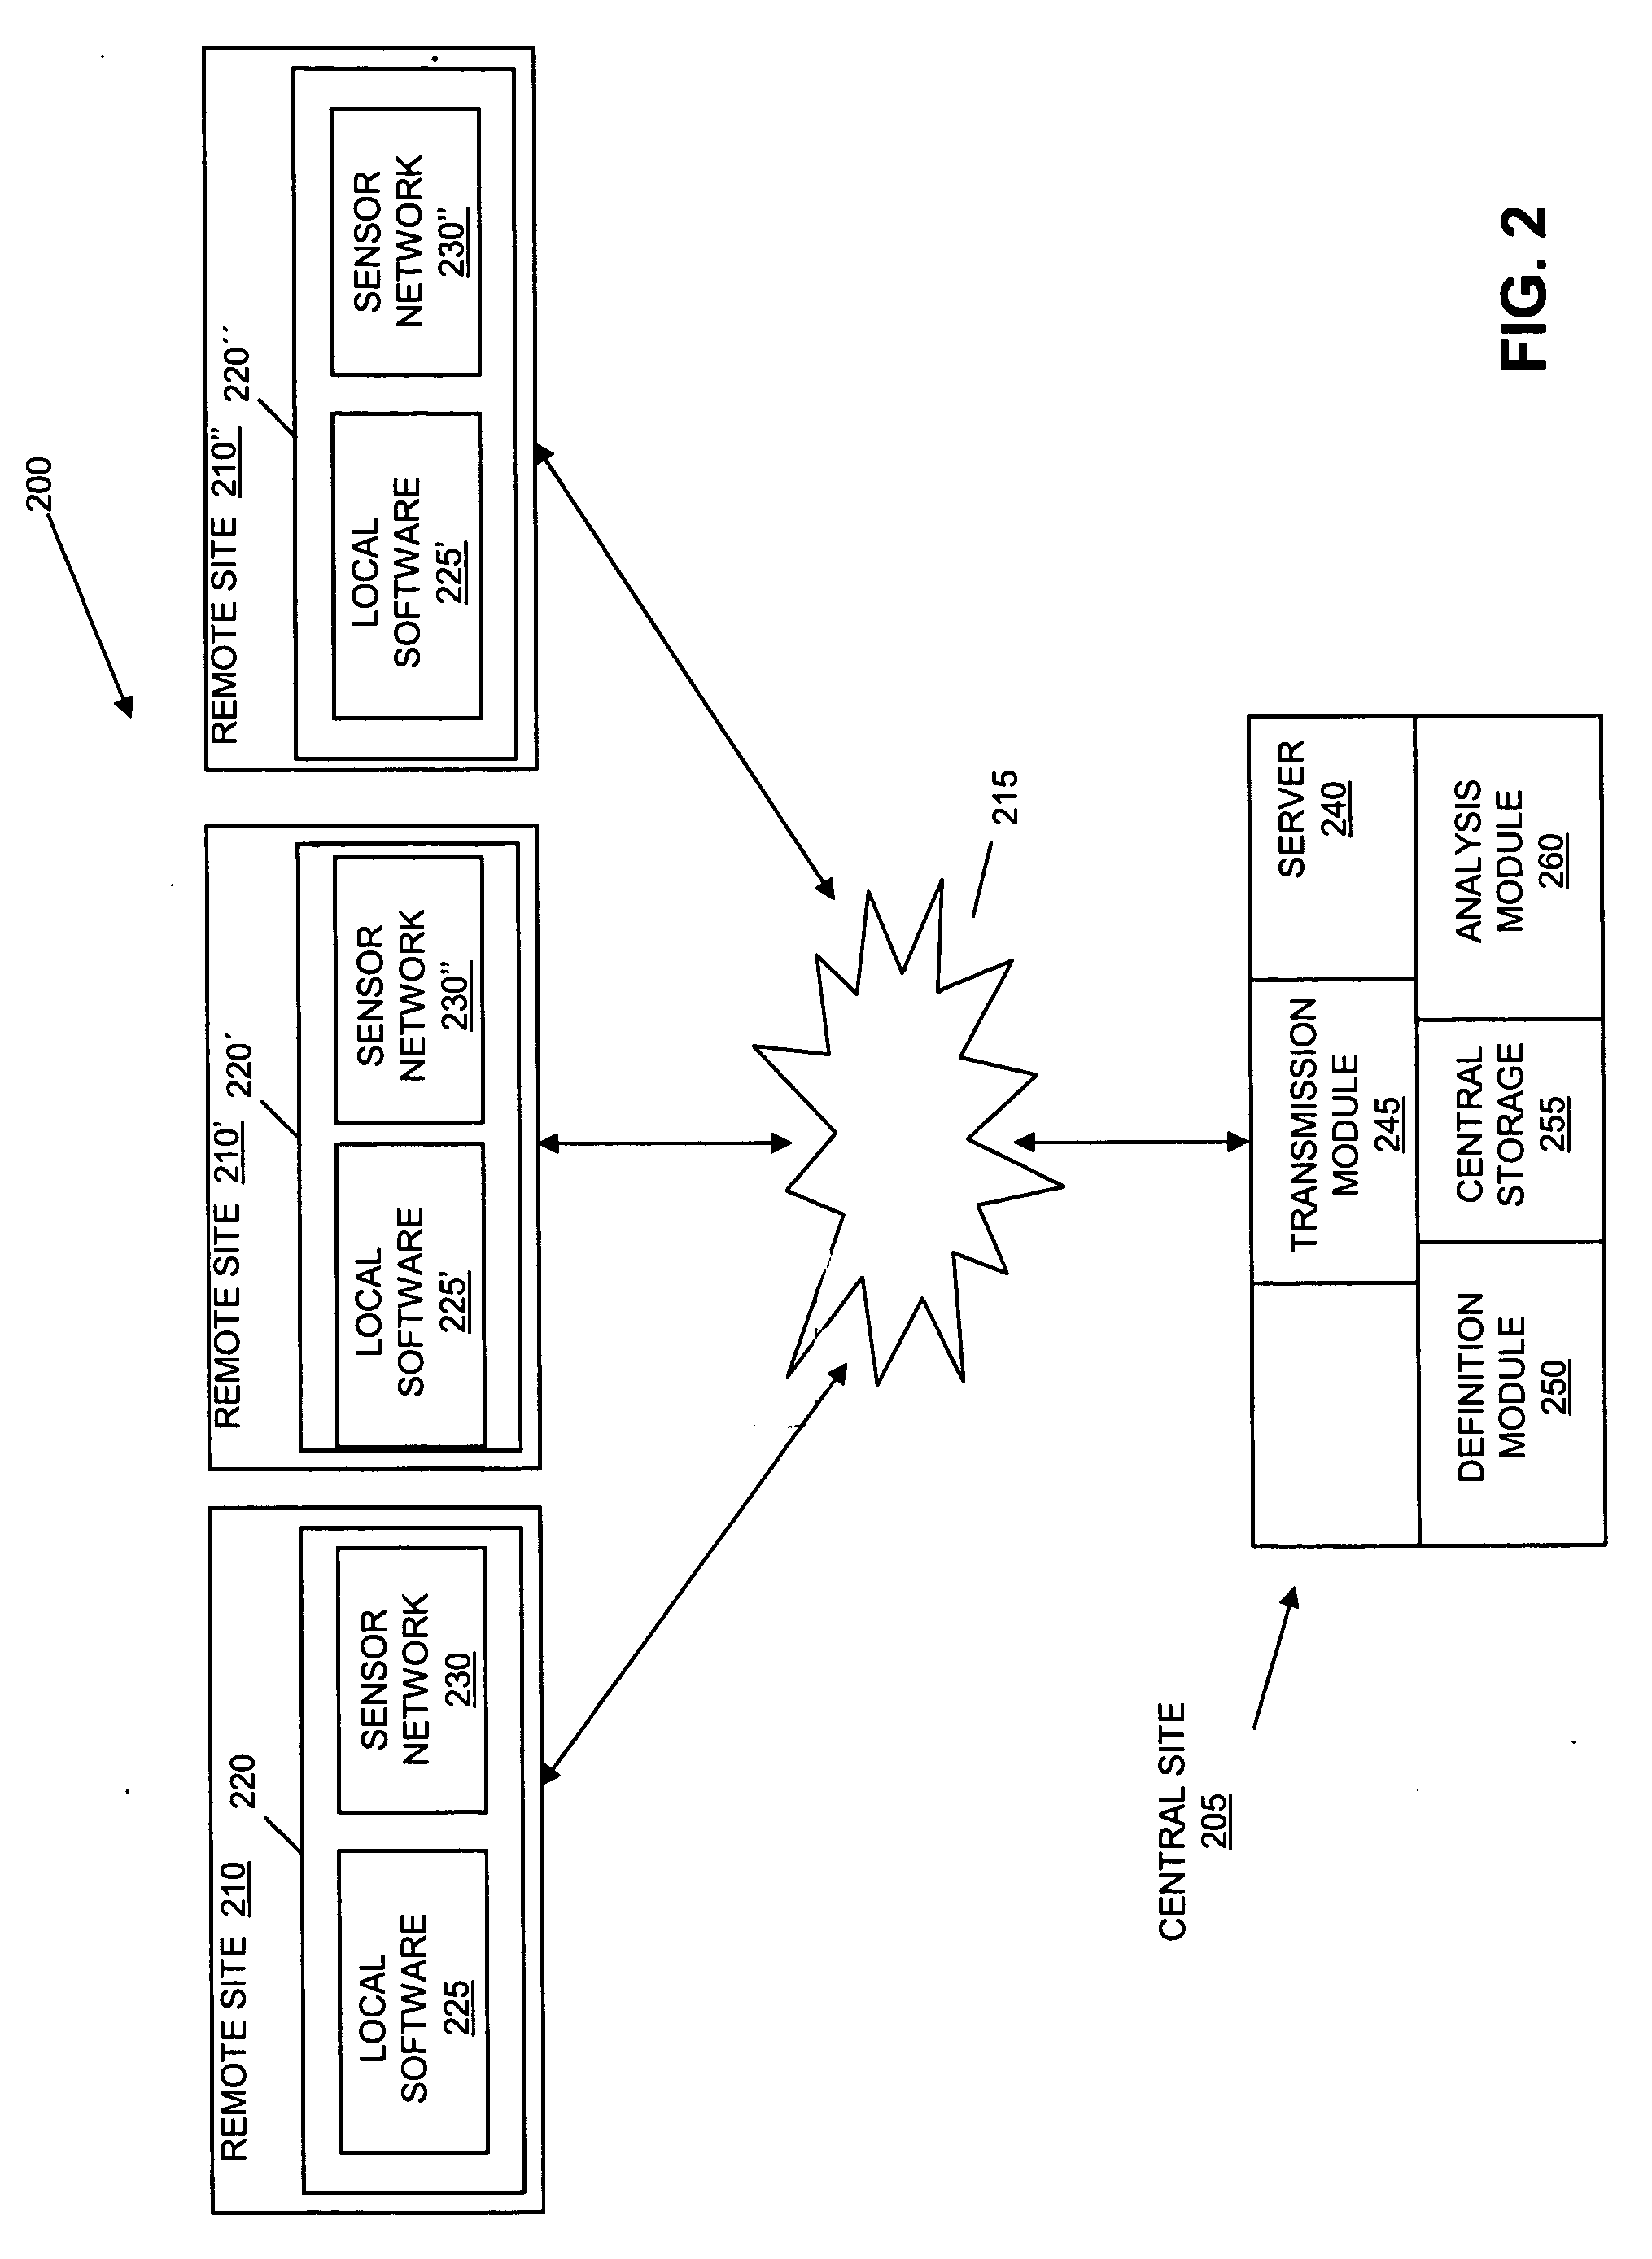 Systems and methods for providing video surveillance data